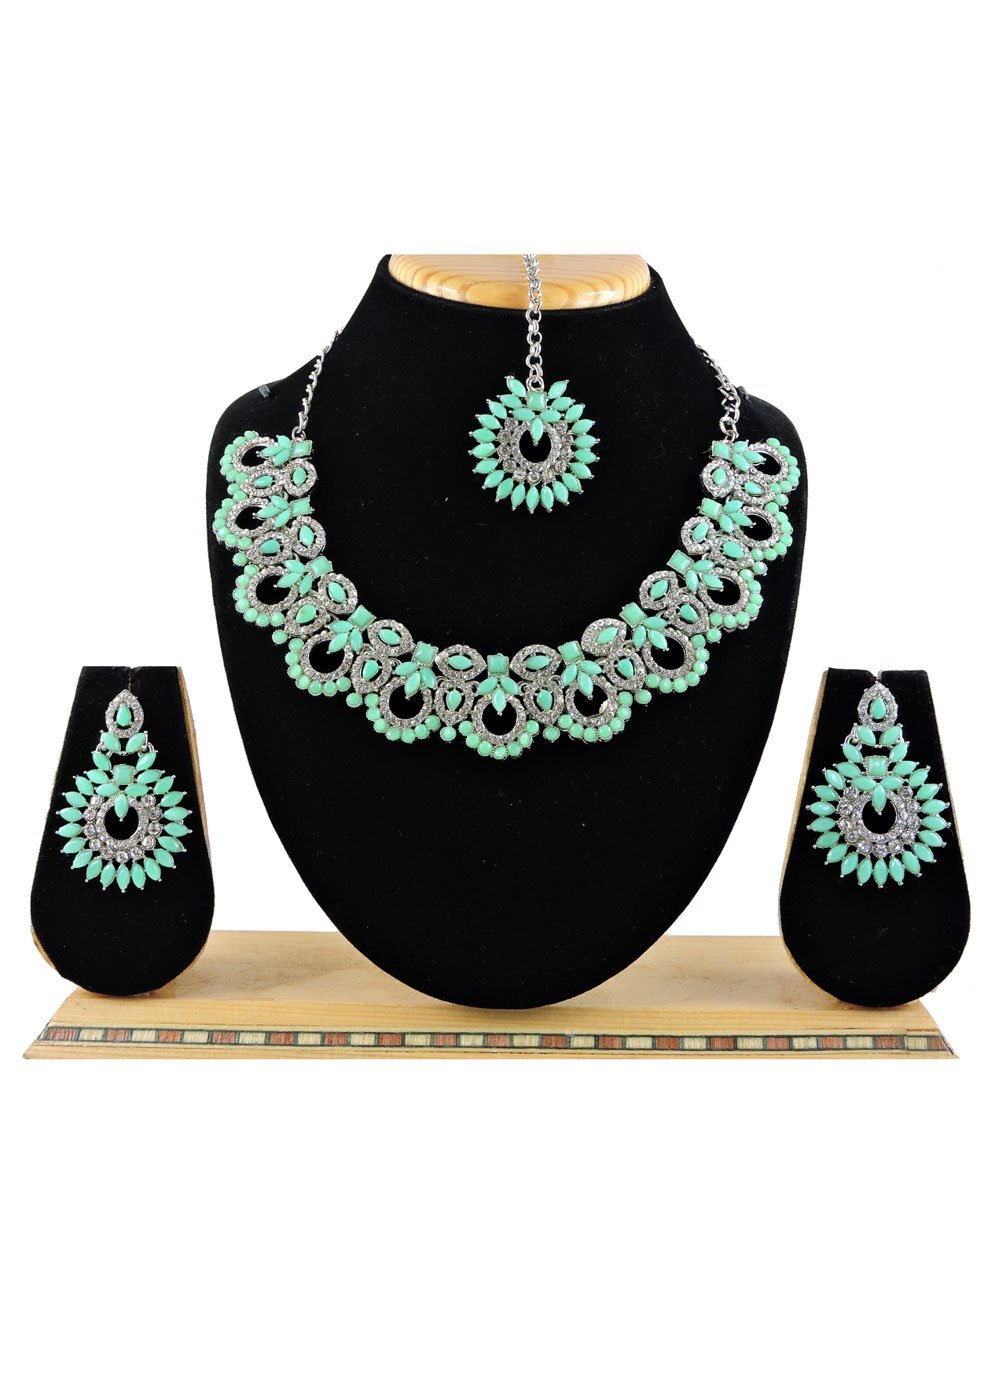 Artistic Silver Rodium Polish Beads Work Alloy Silver Color and Turquoise Necklace Set